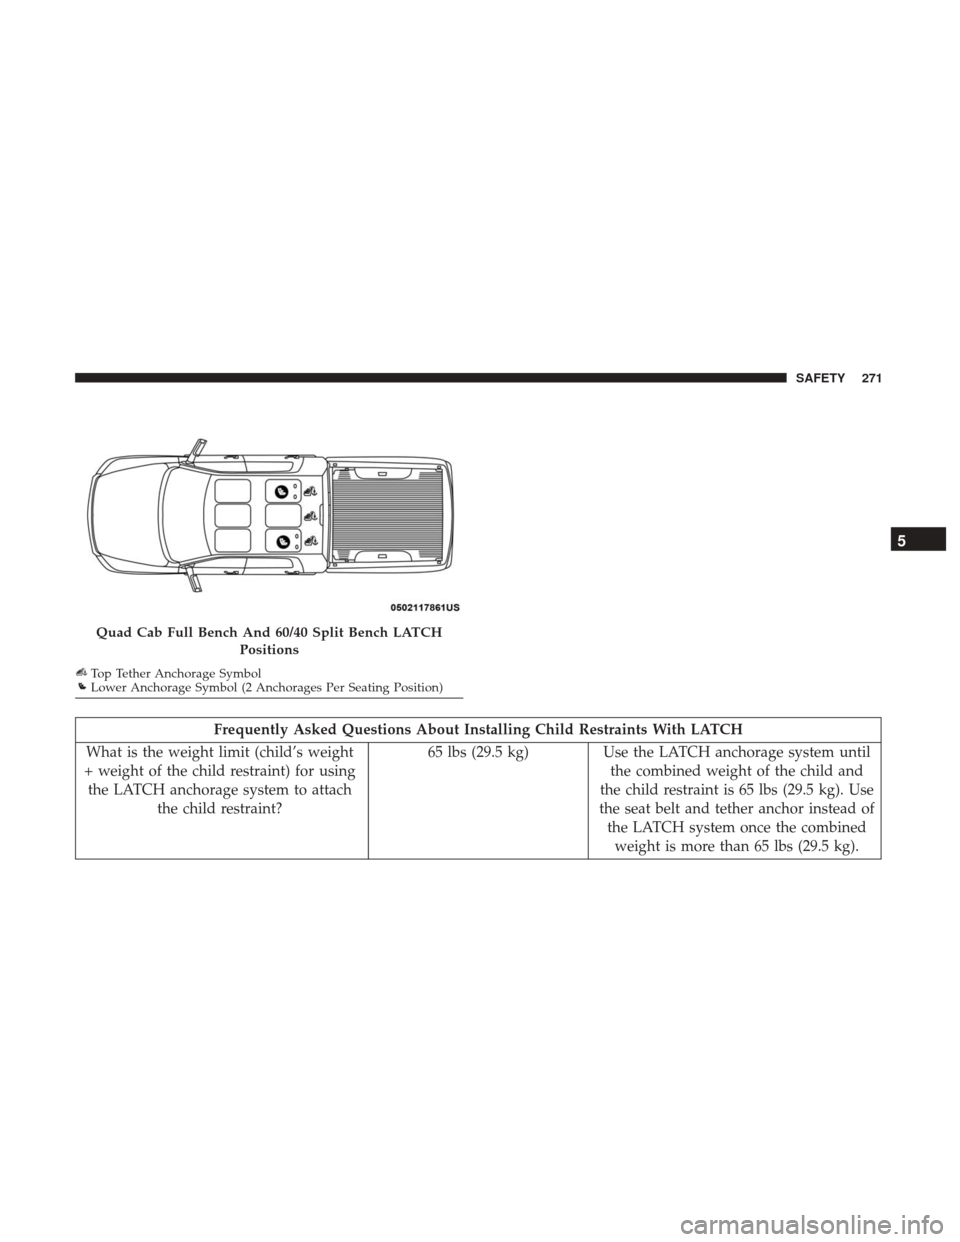 Ram 1500 2019 Owners Guide Frequently Asked Questions About Installing Child Restraints With LATCH
What is the weight limit (child’s weight
+ weight of the child restraint) for using the LATCH anchorage system to attach the c